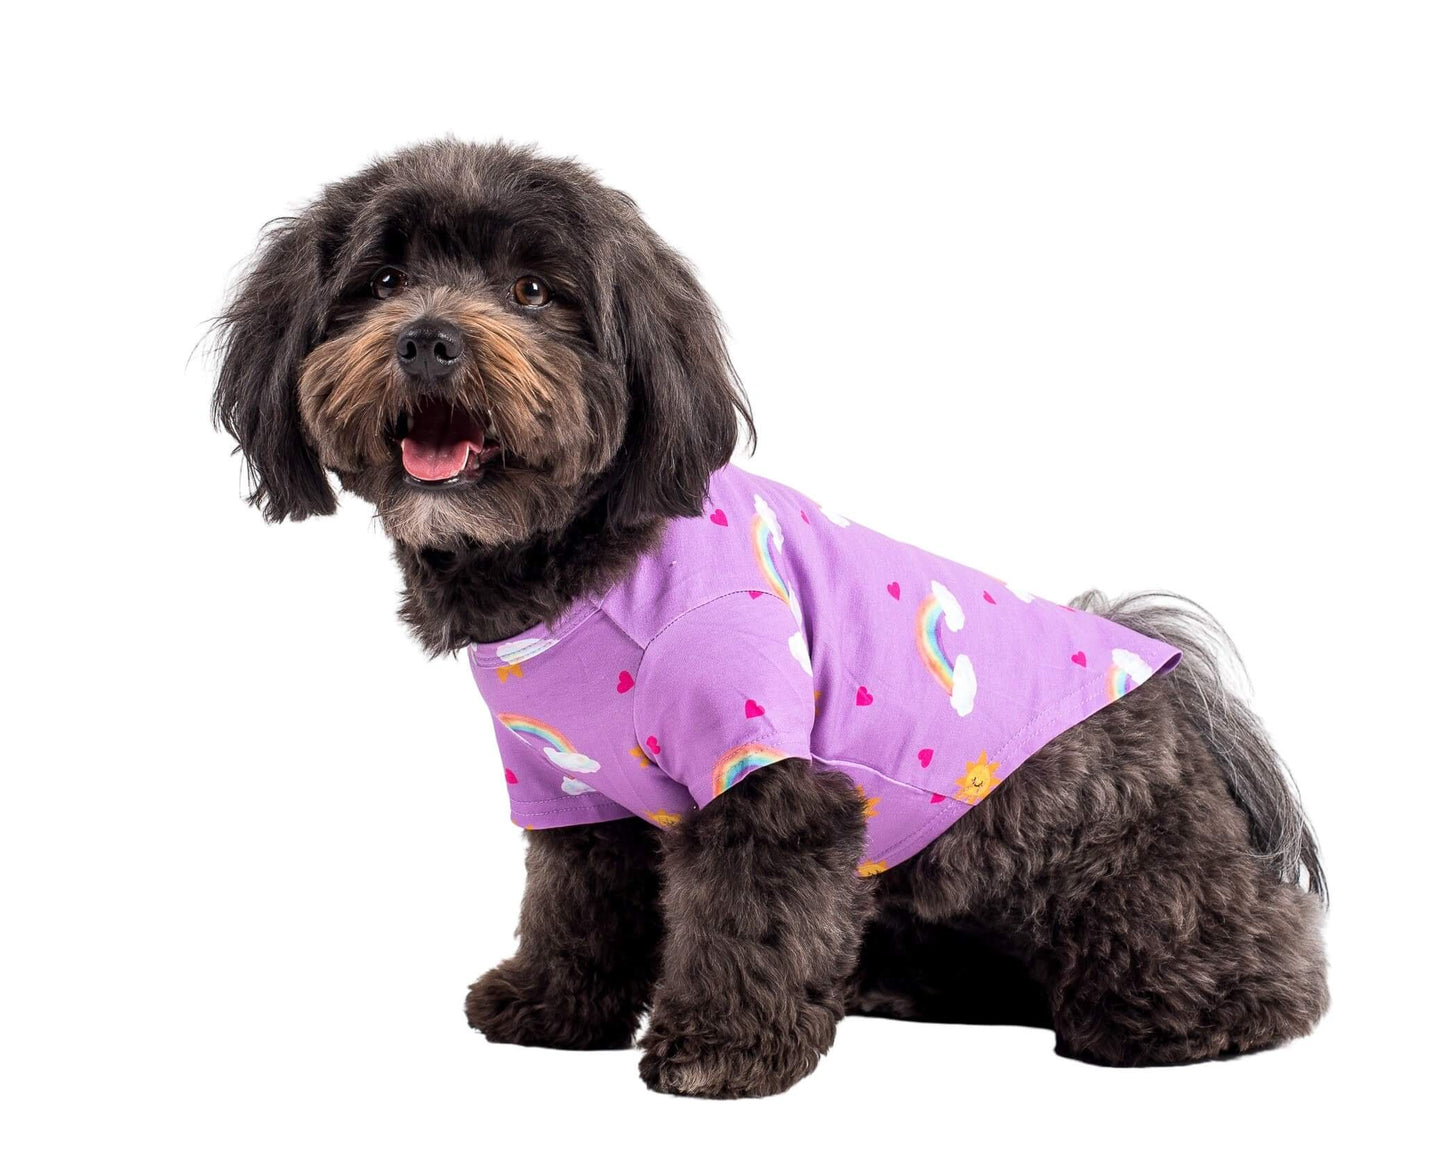 A Havanese dog standing side on to the camera wearing Vibrant Hound's Chasing Rainbow dog shirt. The dog shirt is purple with rainbows, bright suns, and love hearts printed on it.